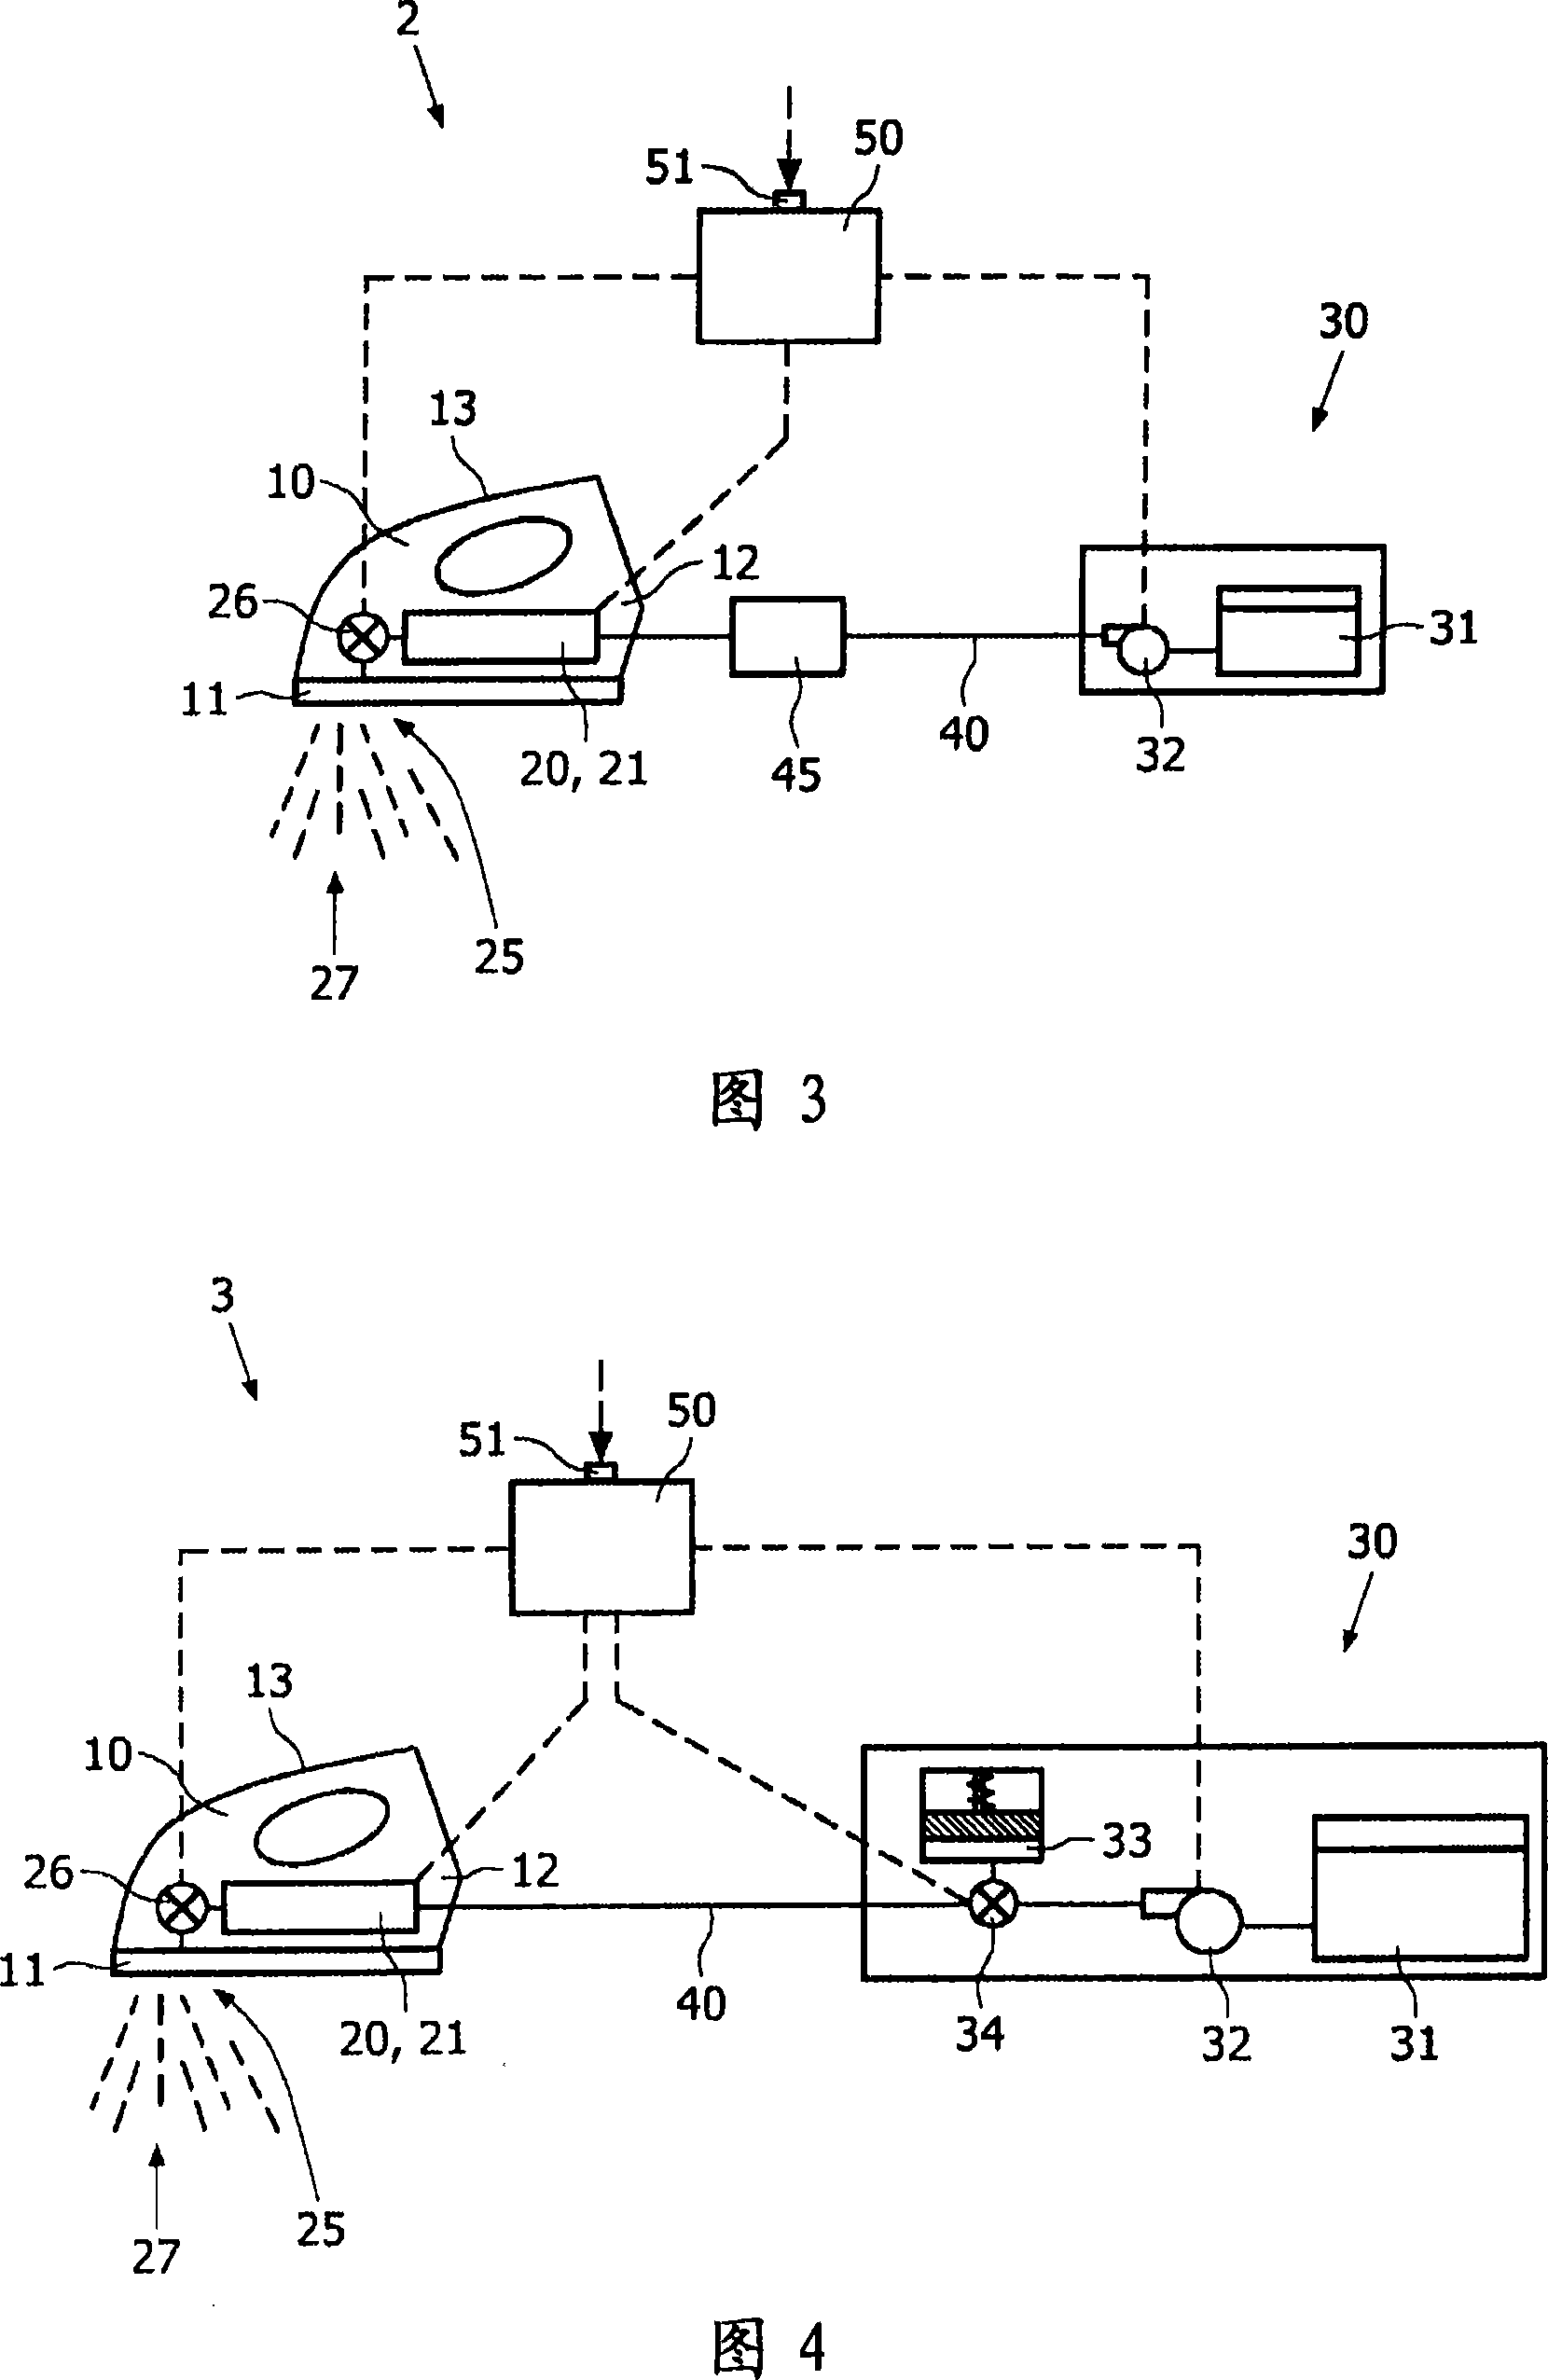 Method for generating a burst of steam from a steam iron